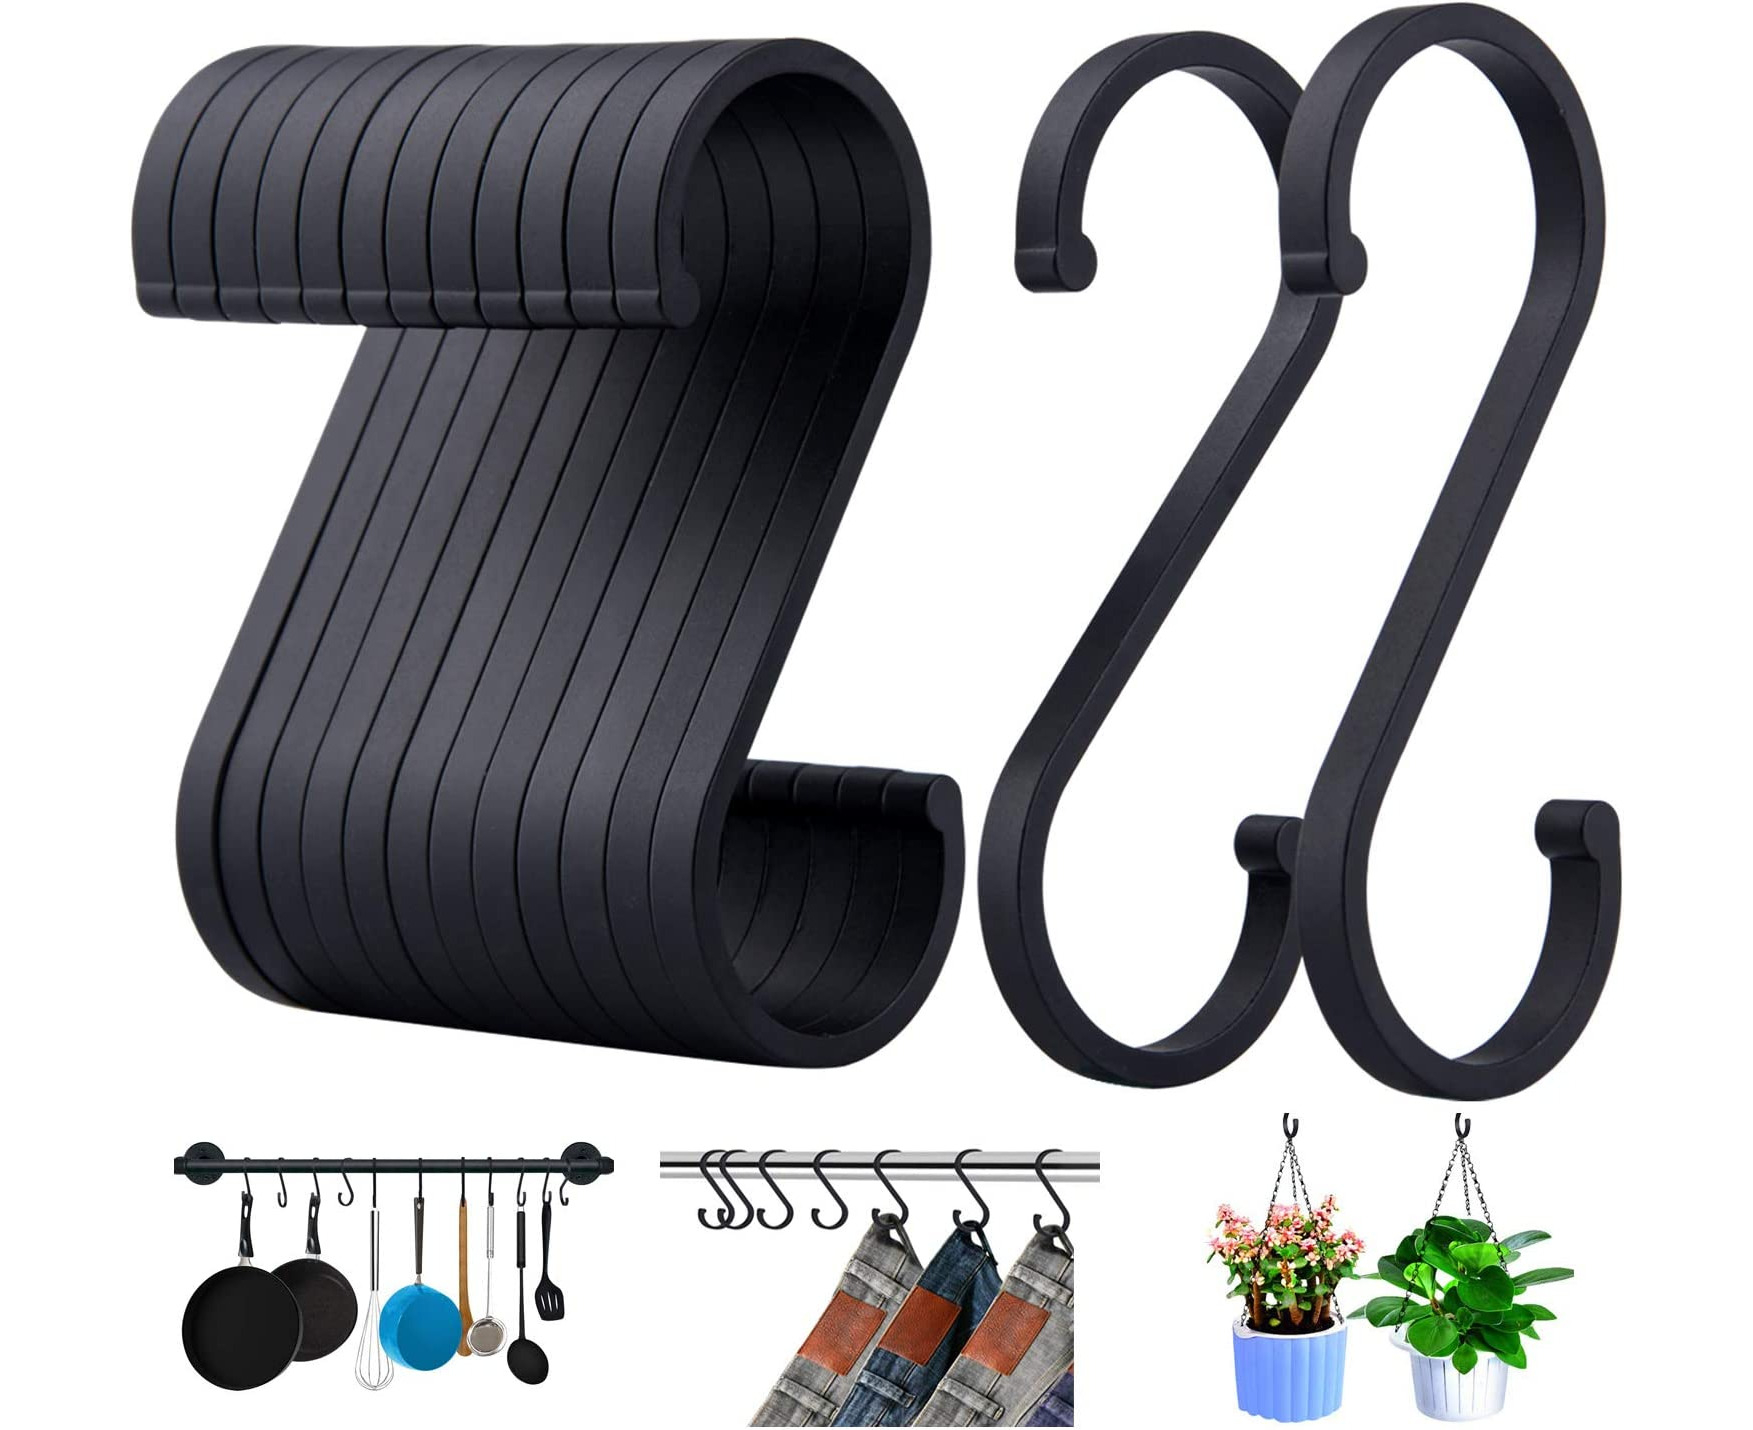 Heavy Duty 30 PCS S Hooks Stainless Steel Pan Pot Holder Rack Hooks Hanging Hangers S Shaped Hooks for Kitchenware Clothes Bags Towels Plants Garden Tools 